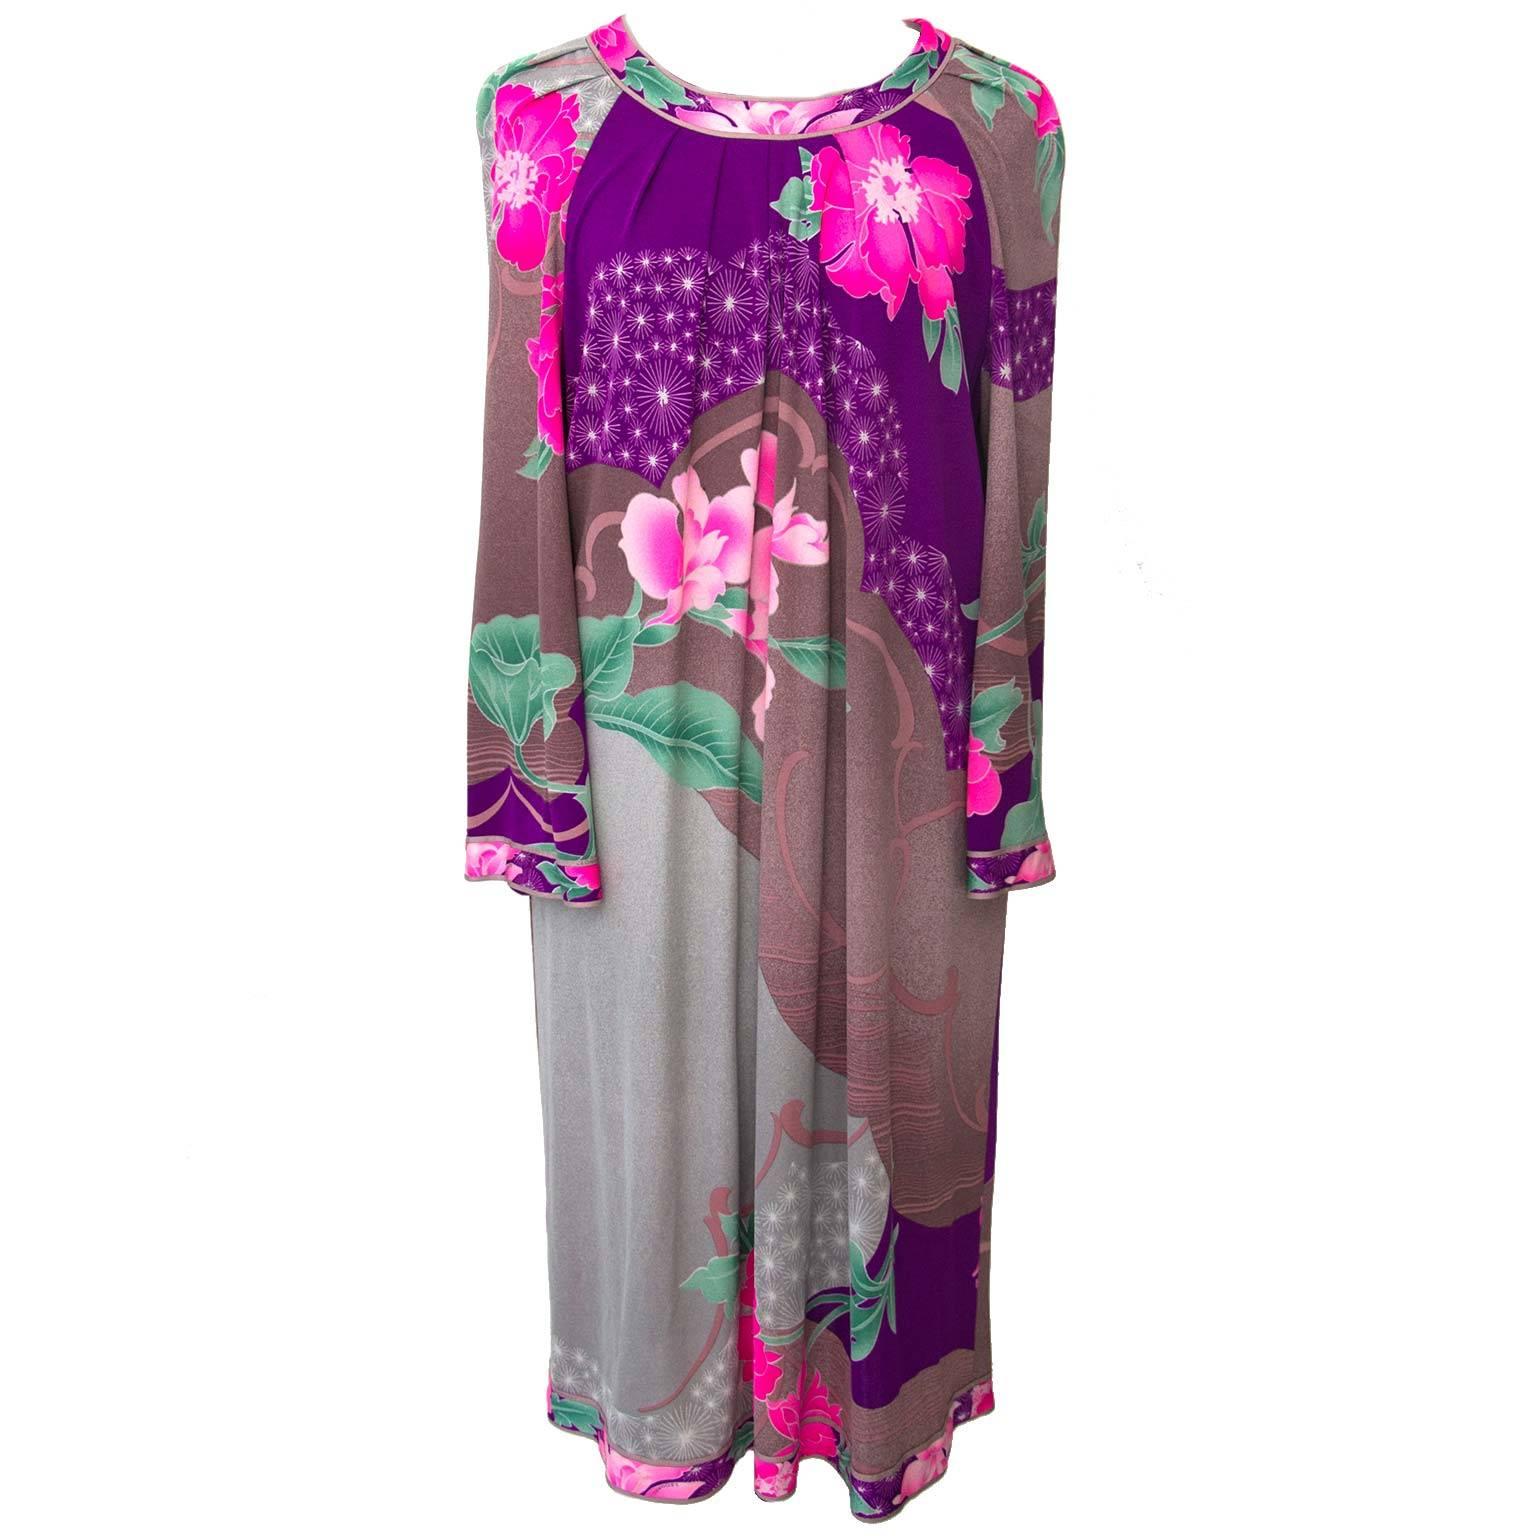 Excellent condition

Leonard Purple Pink Floral Dress

This vintage Leonard dress is perfectly made for anyone that loves flowerprints.

It will definately bring colour to your wardrobe.

The bright pink flowers are very eye-catching which is